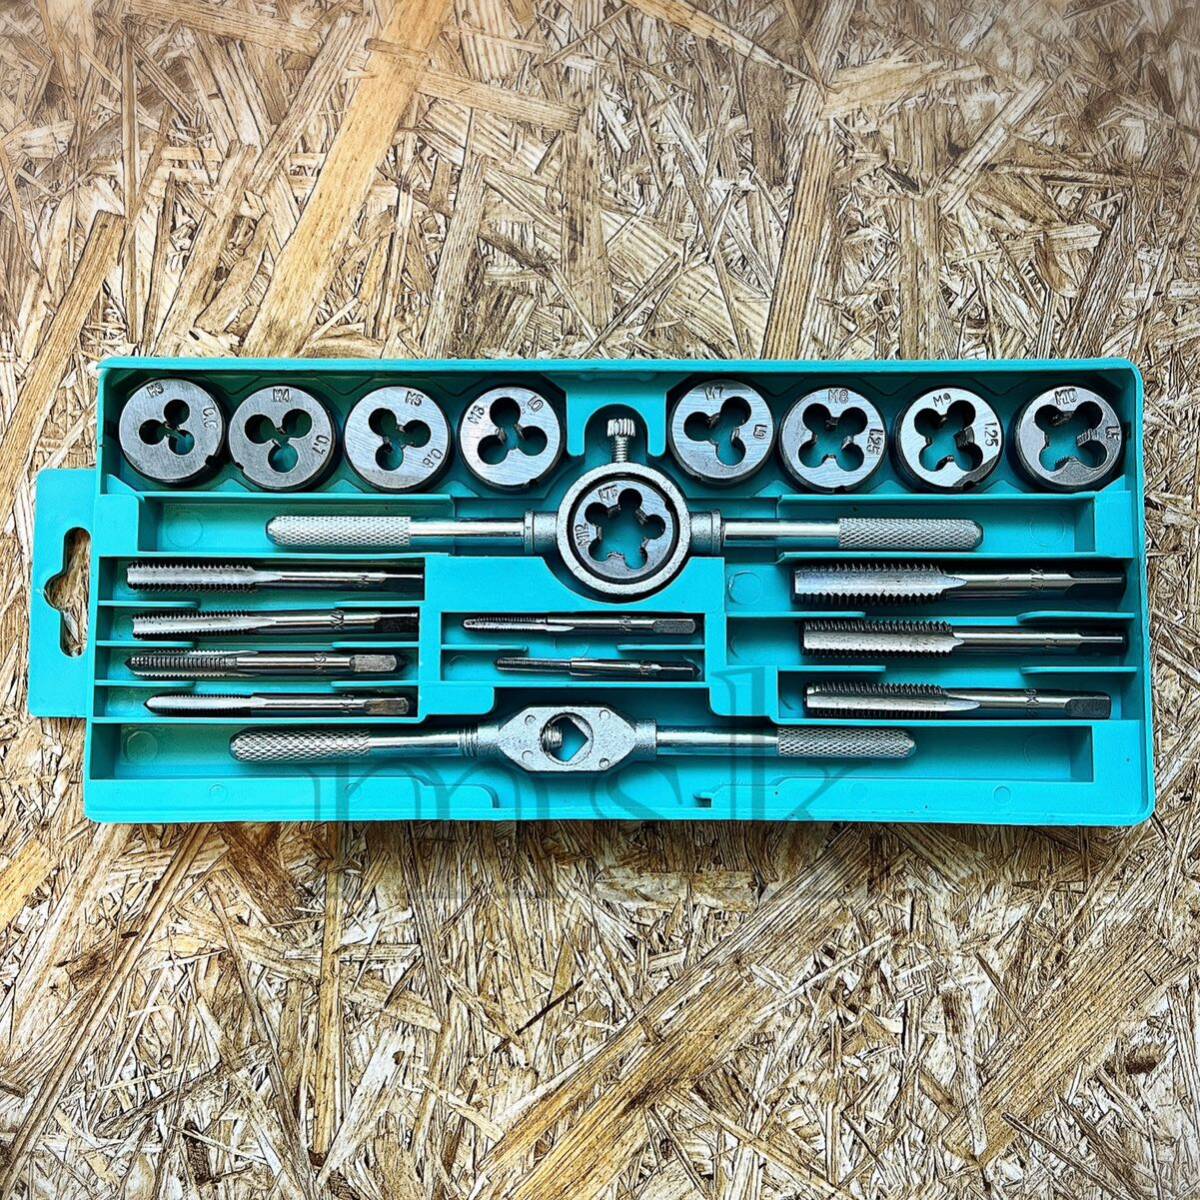  tapping die 20pc set screw .. bolt nut tool set screw mountain modification 